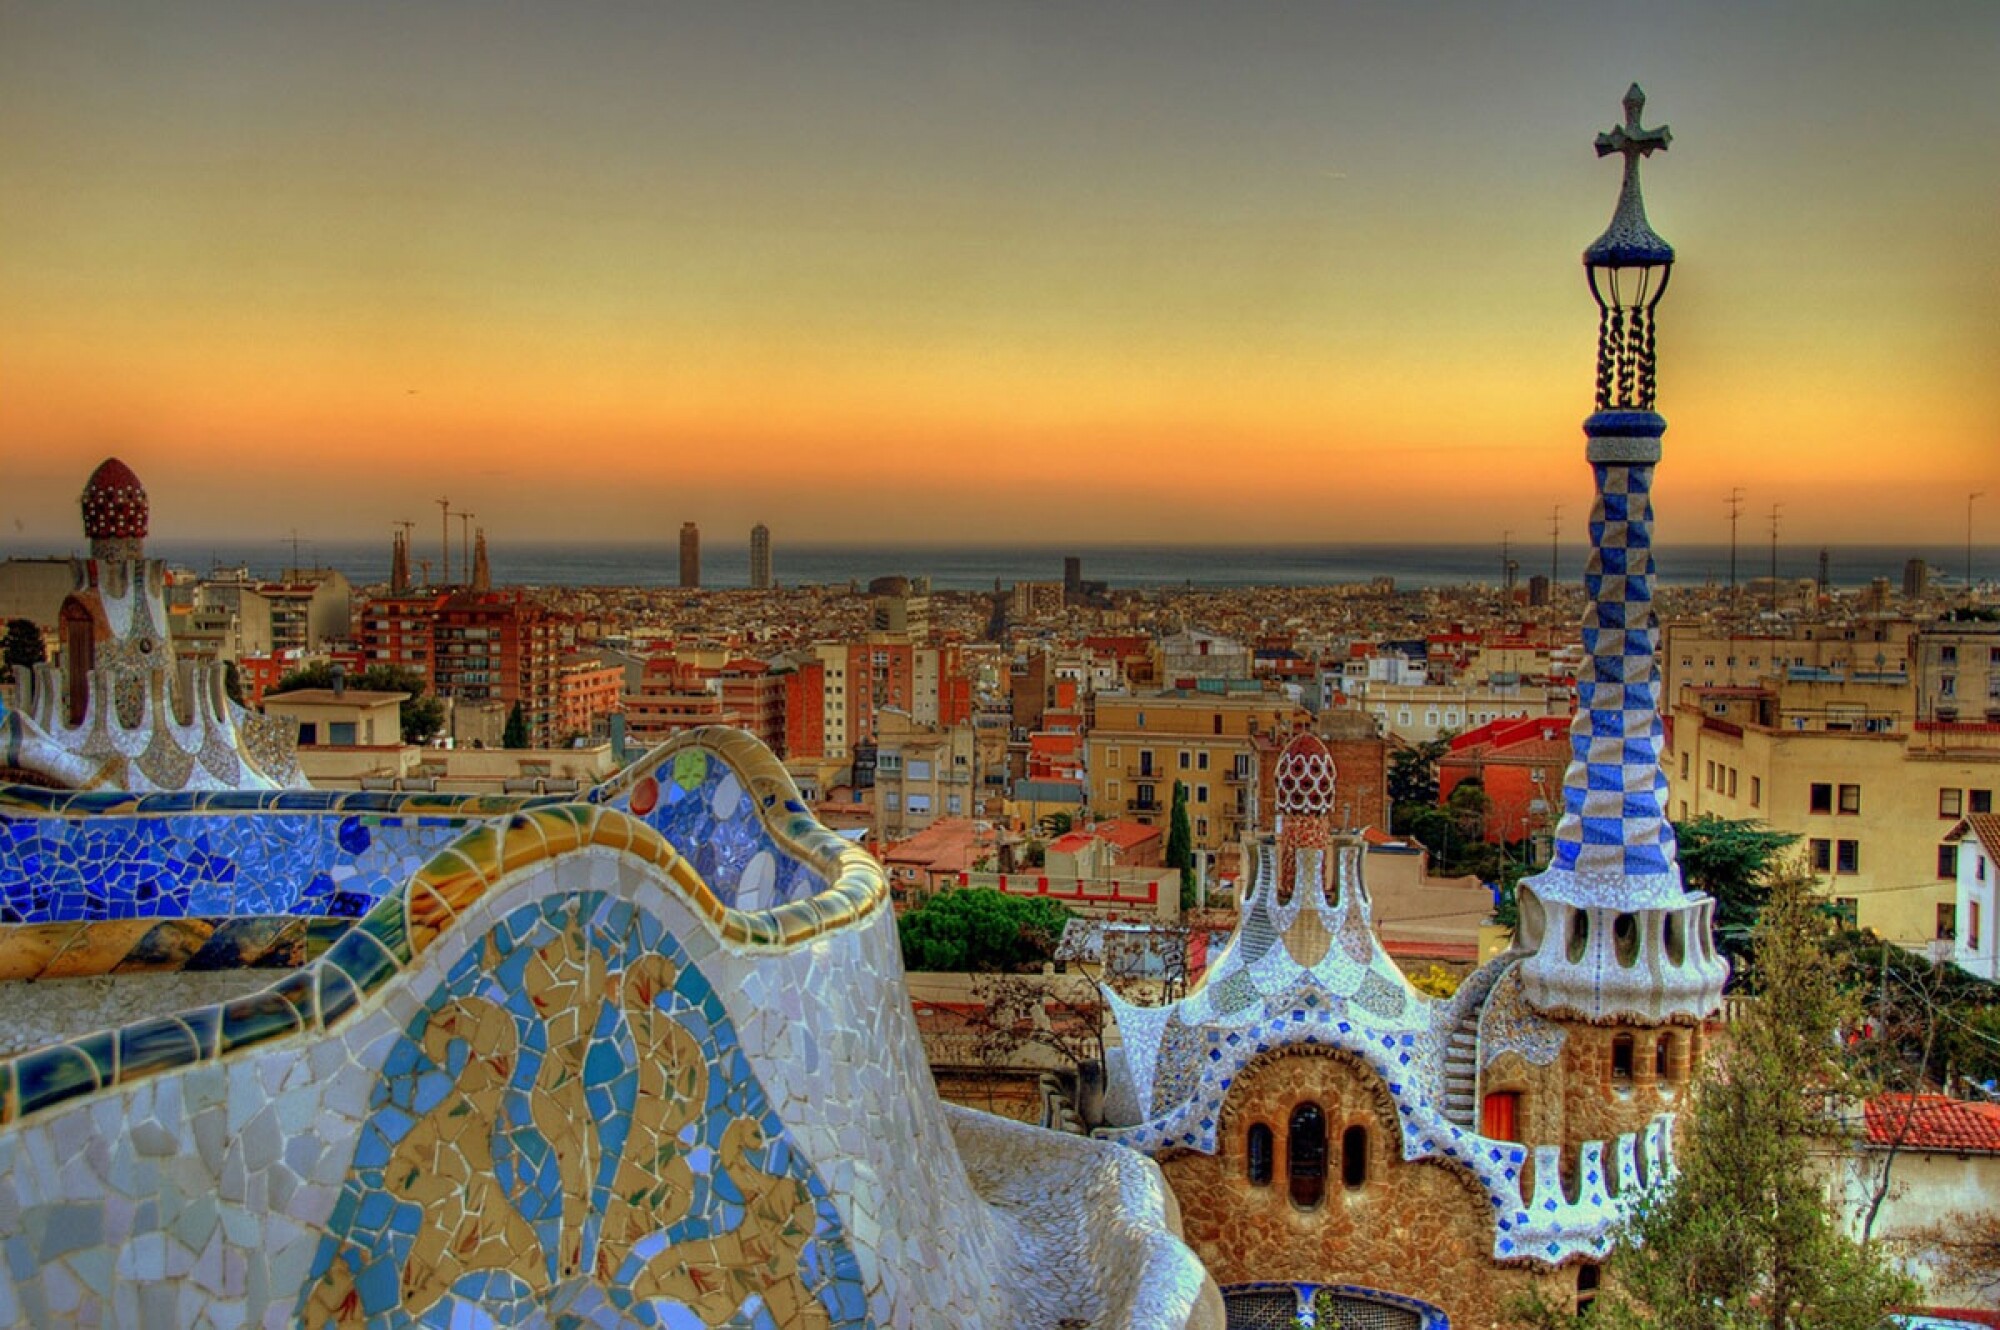 Spain: Barcelona, Park Guell, a World Heritage Site under "Works of Antoni Gaudí". 2000x1330 HD Background.